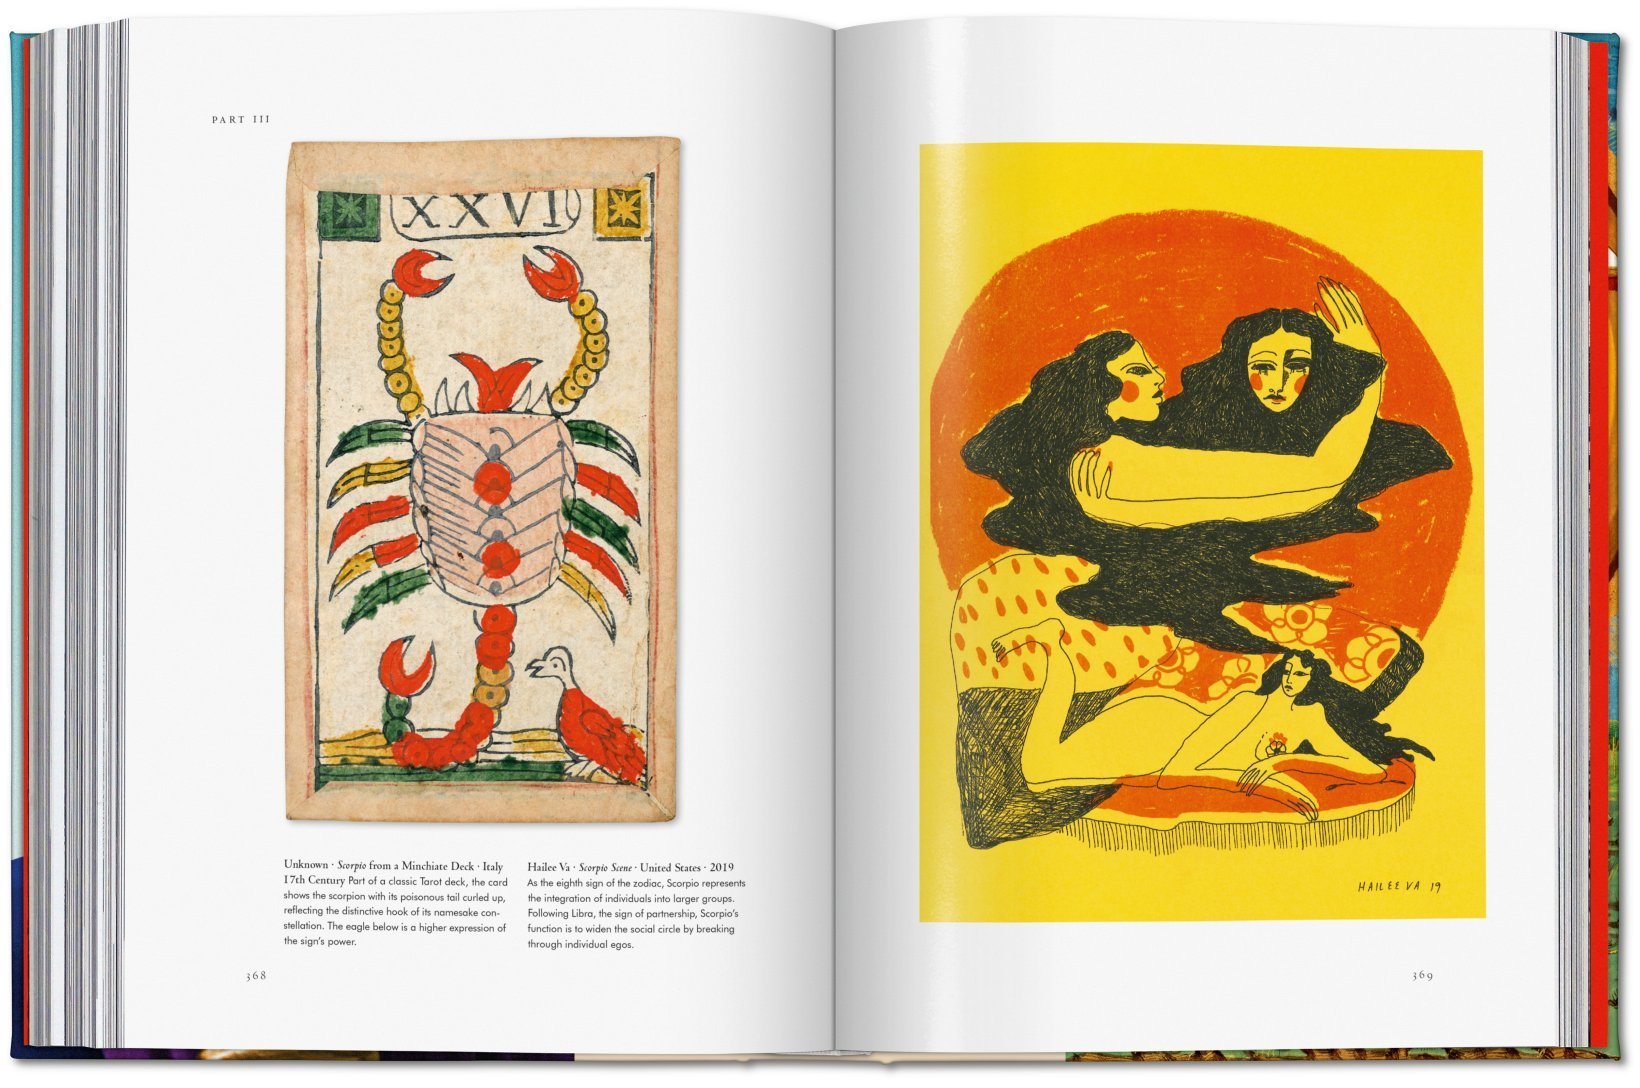 Artbook - Sách Tiếng Anh - Astrology: The Library of Esoterica